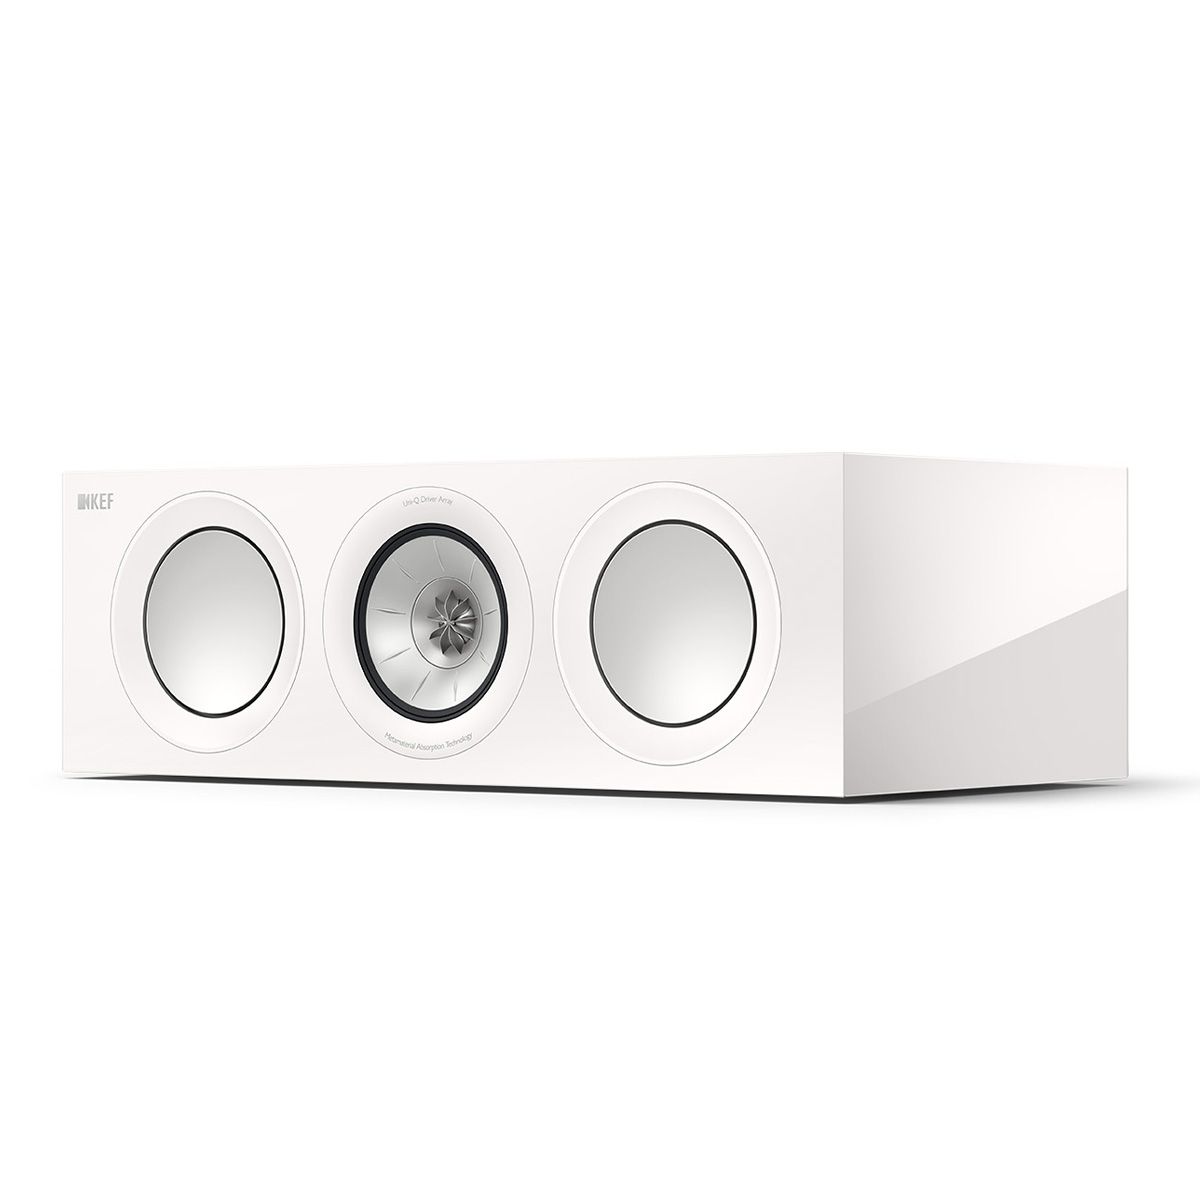 KEF R2 Meta LCR Speaker - Each white angled front view without grille